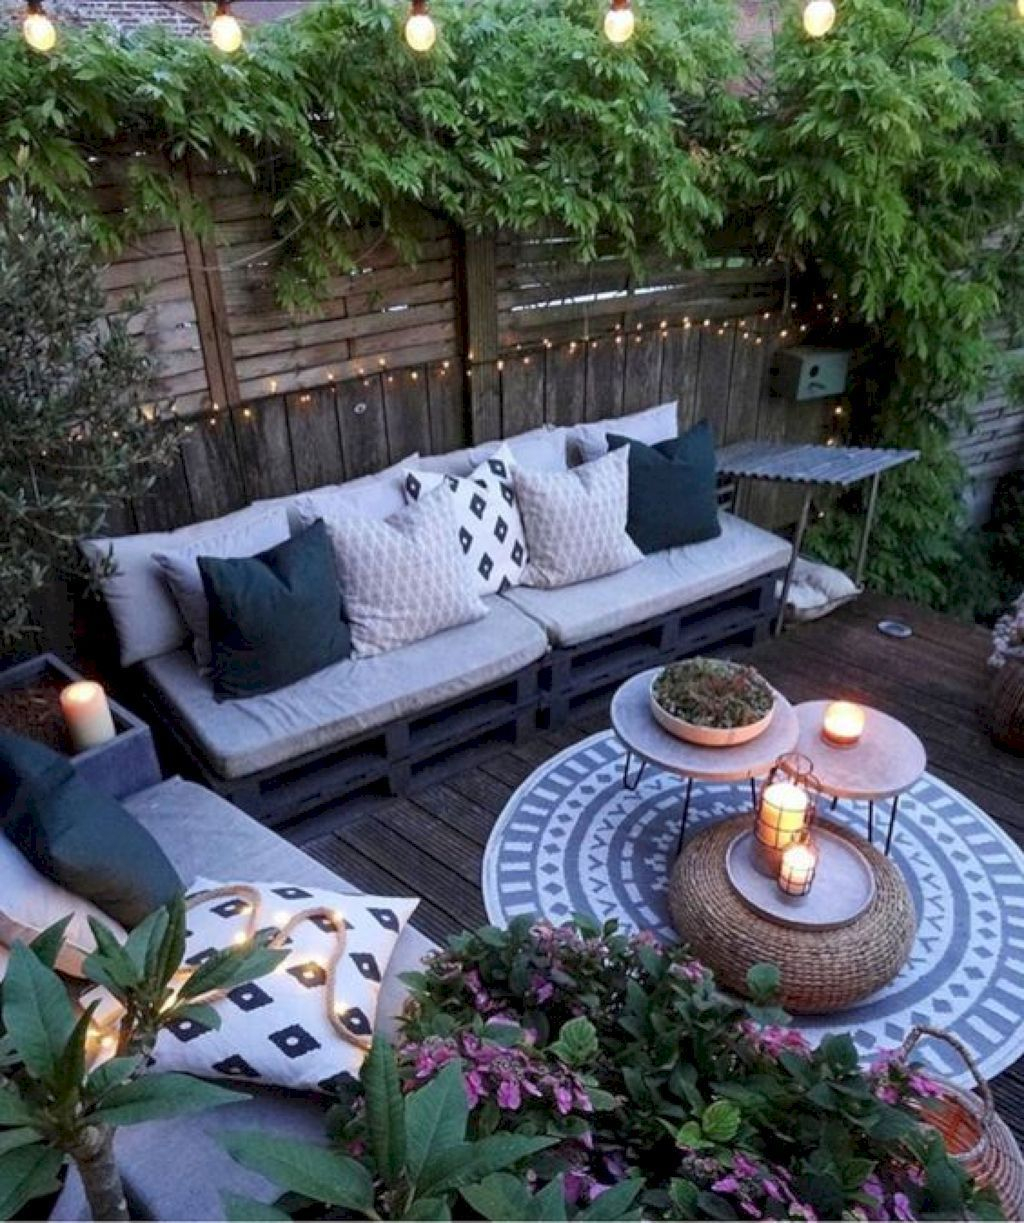 Outstanding Garden Design Ideas With Best Style To Try41